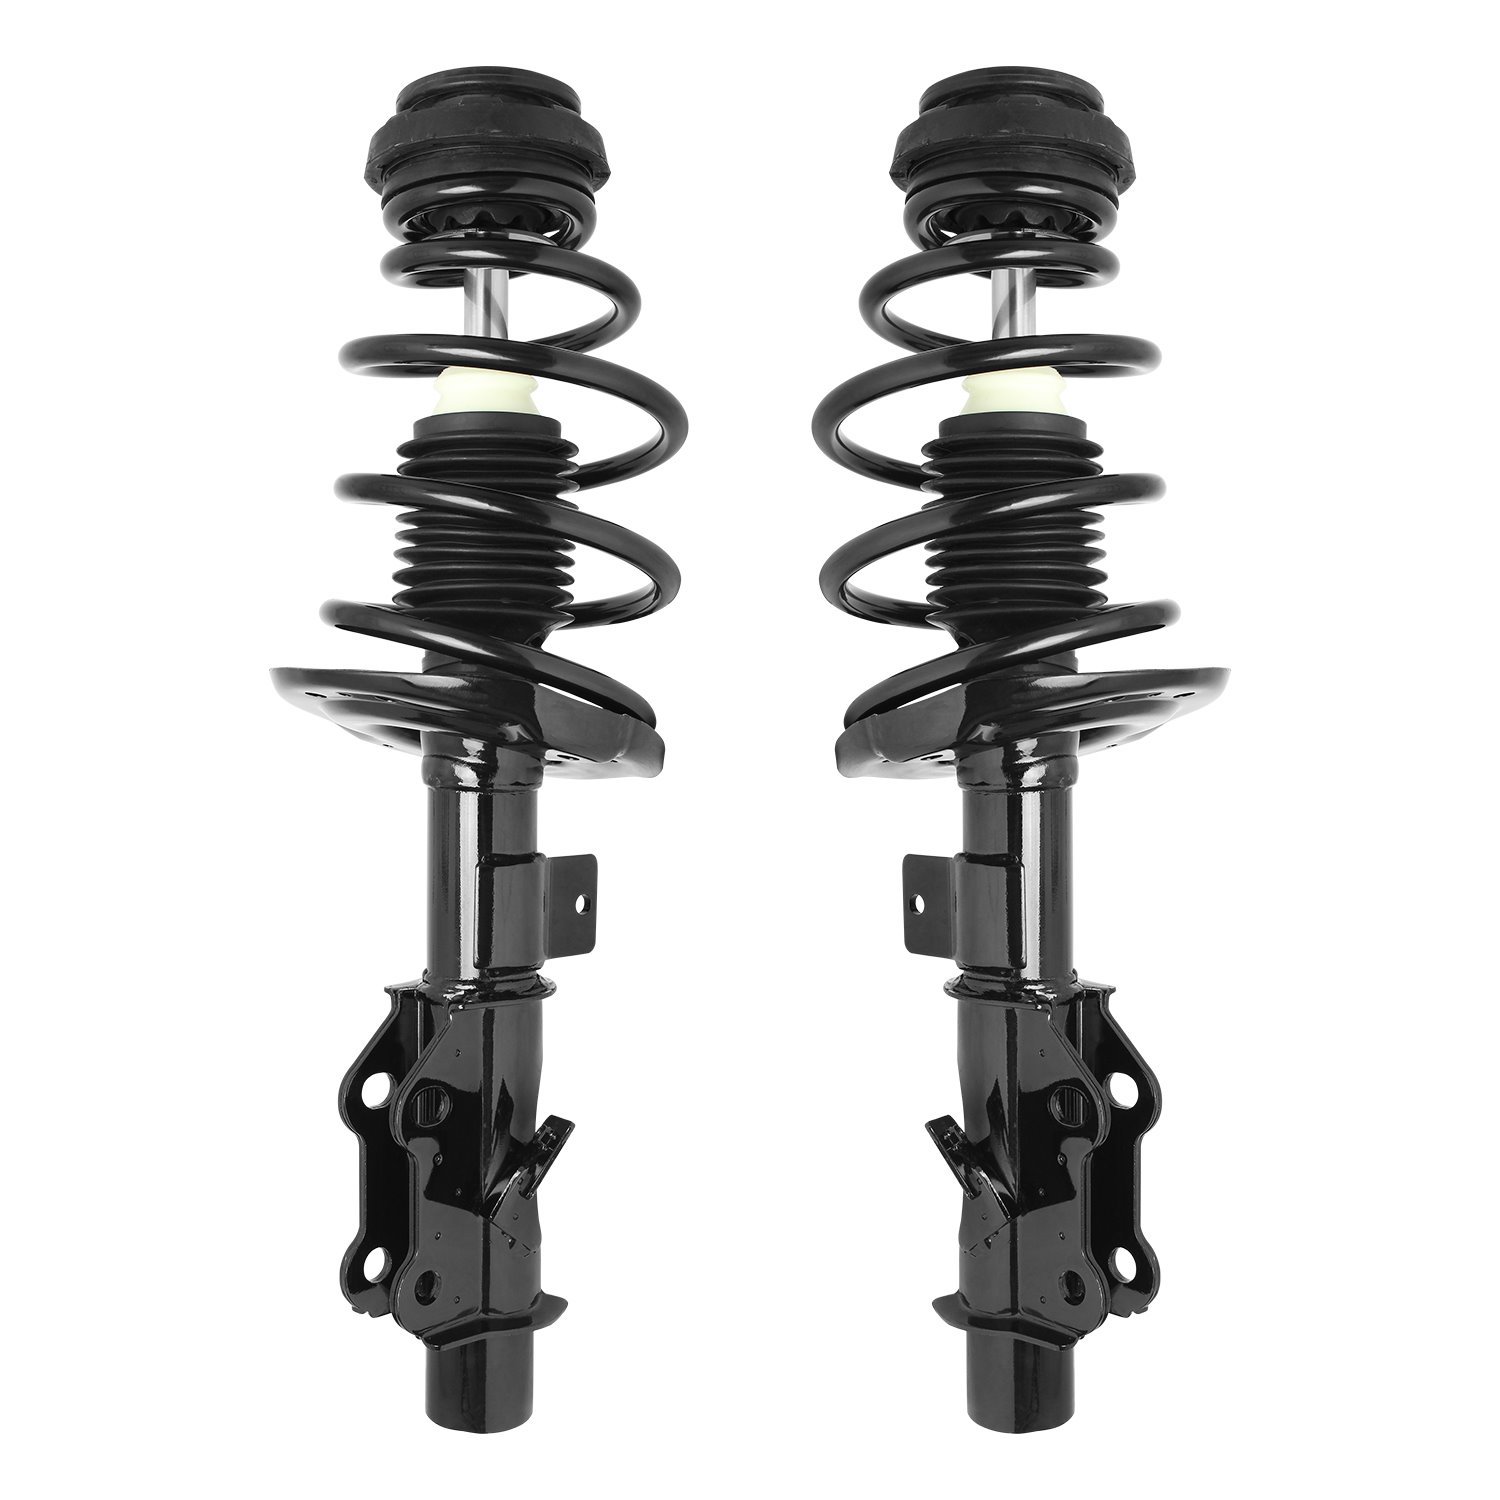 2-11625-11626-001 Suspension Strut & Coil Spring Assembly Set Fits Select Chevy Camaro